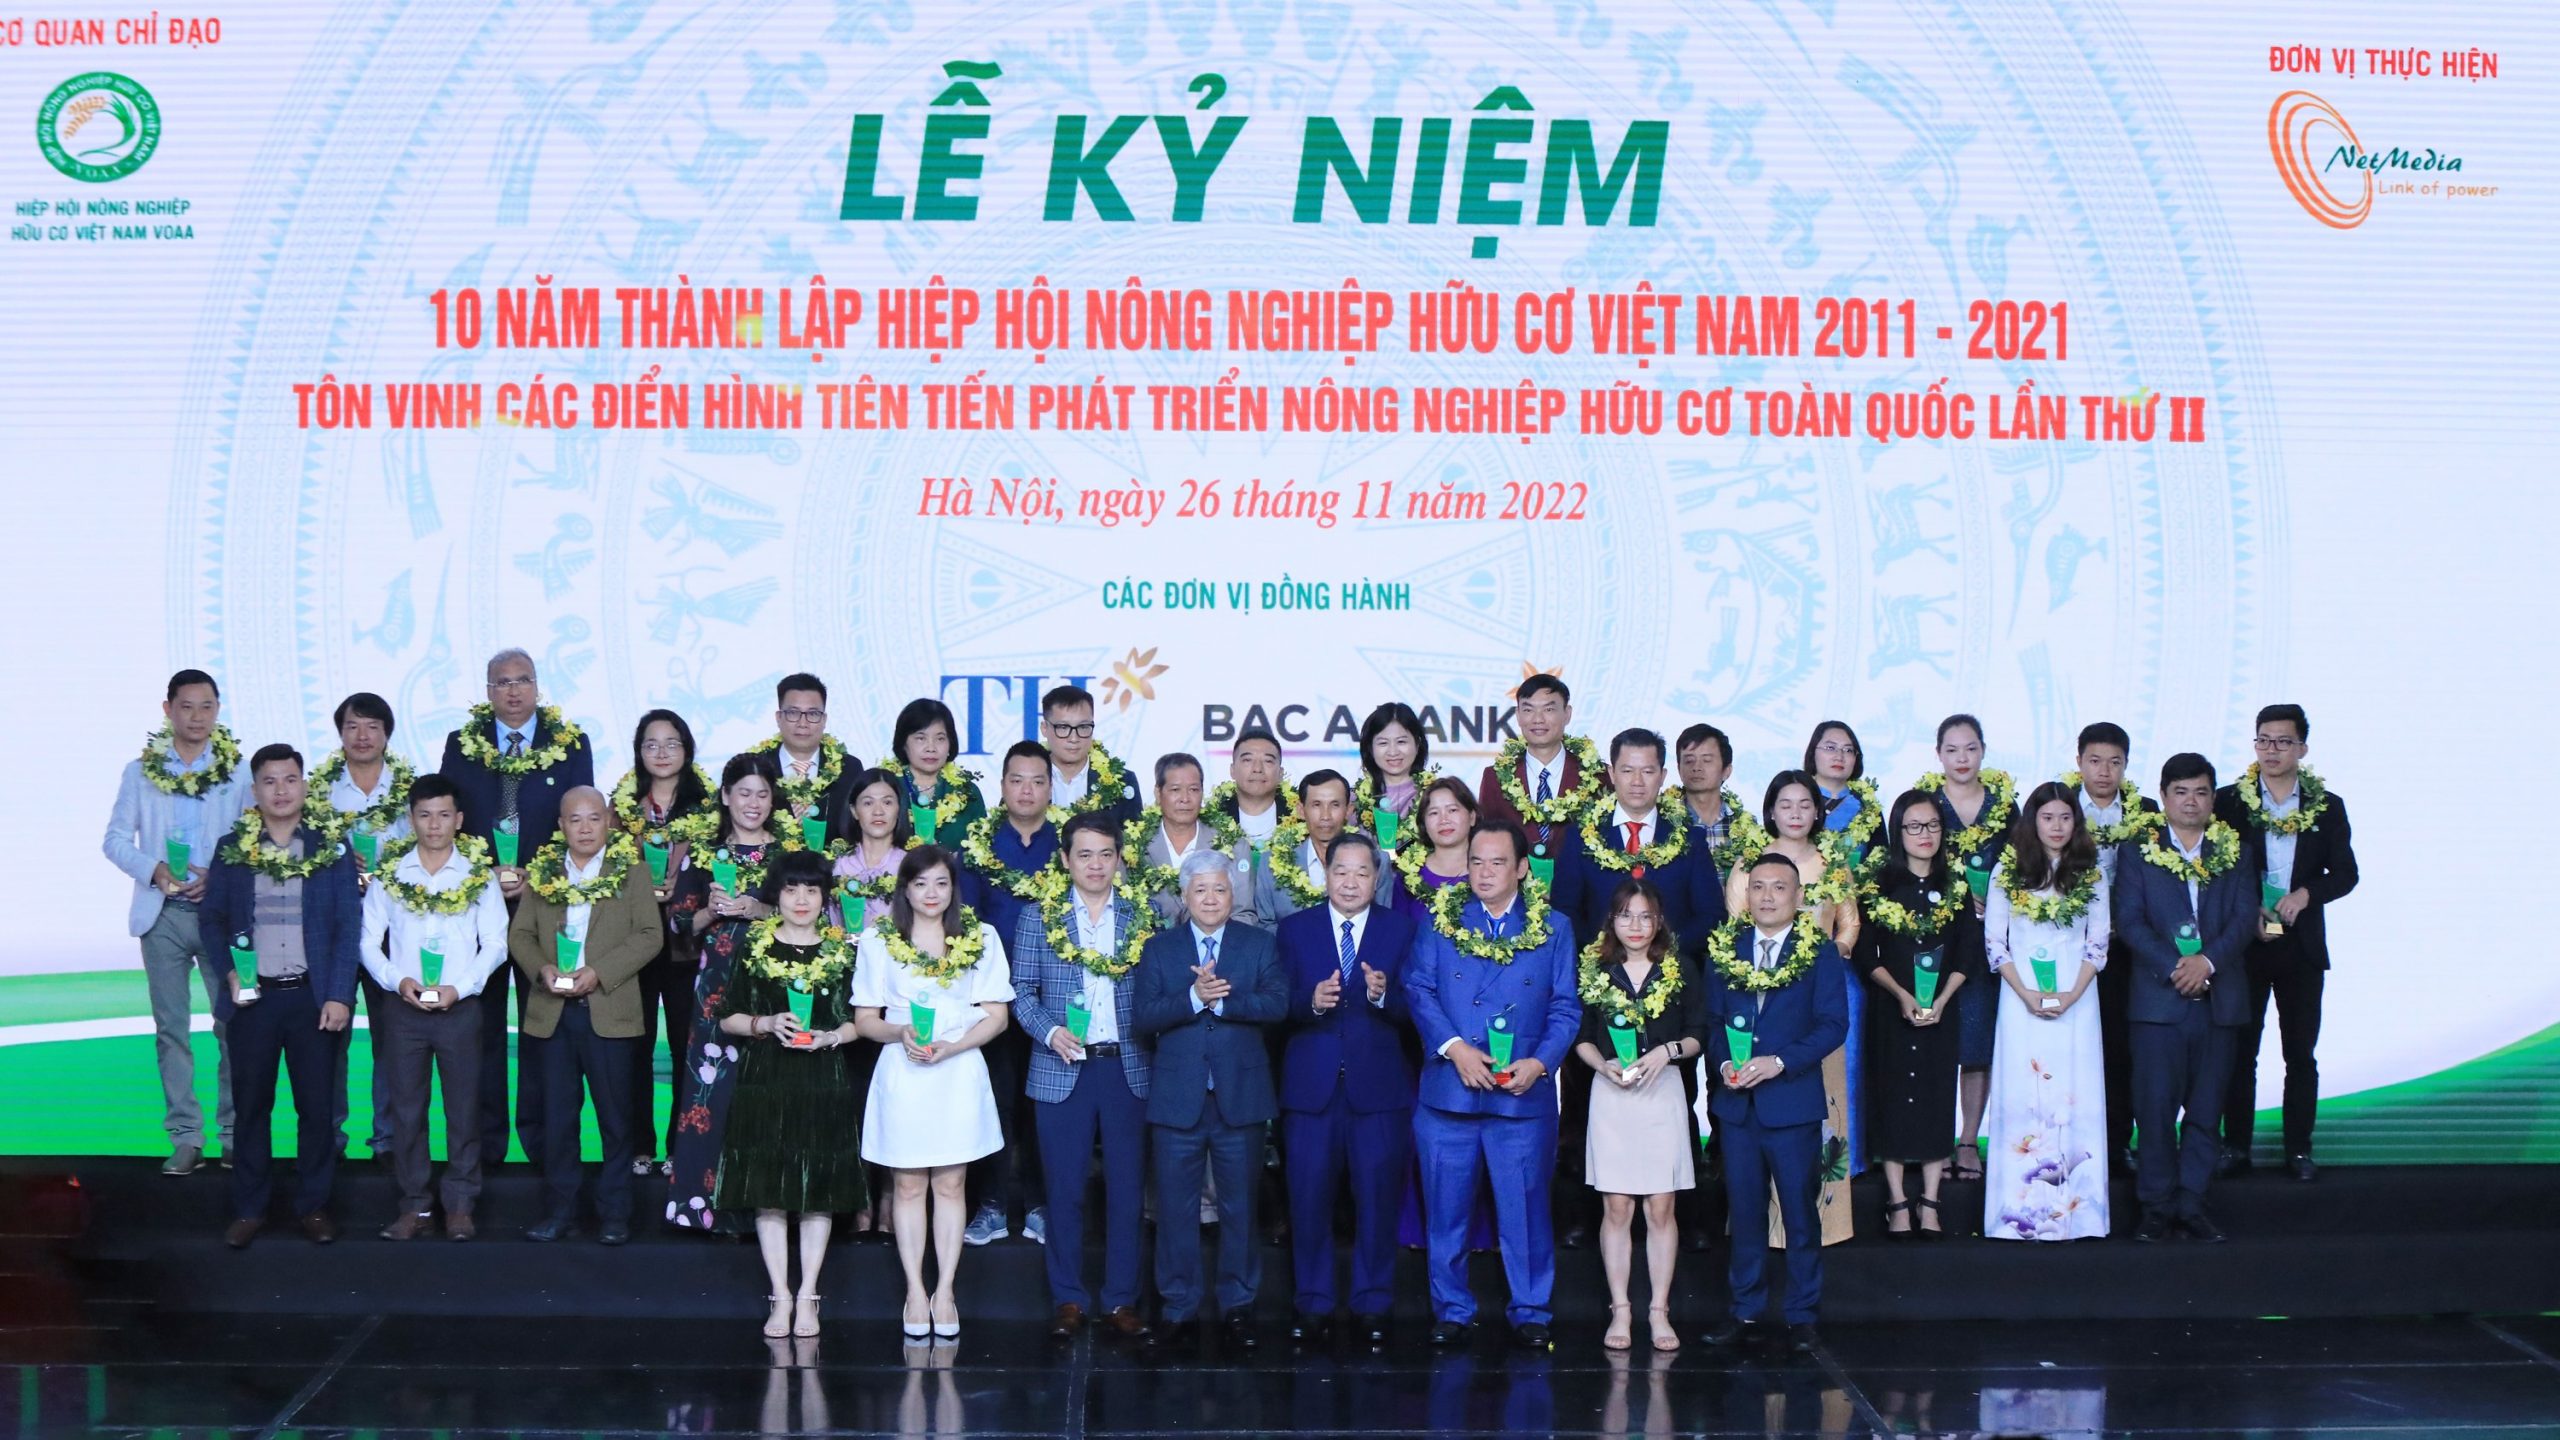 Last week, on the 10th anniversary of the establishment of the Vietnam Organic Agriculture Association (2012 - 2022), Visimex was honoured to receive the award of Organic Products for Community Health in the Ceremony of Honoring Pioneers development of organic agriculture nationwide in 2022.